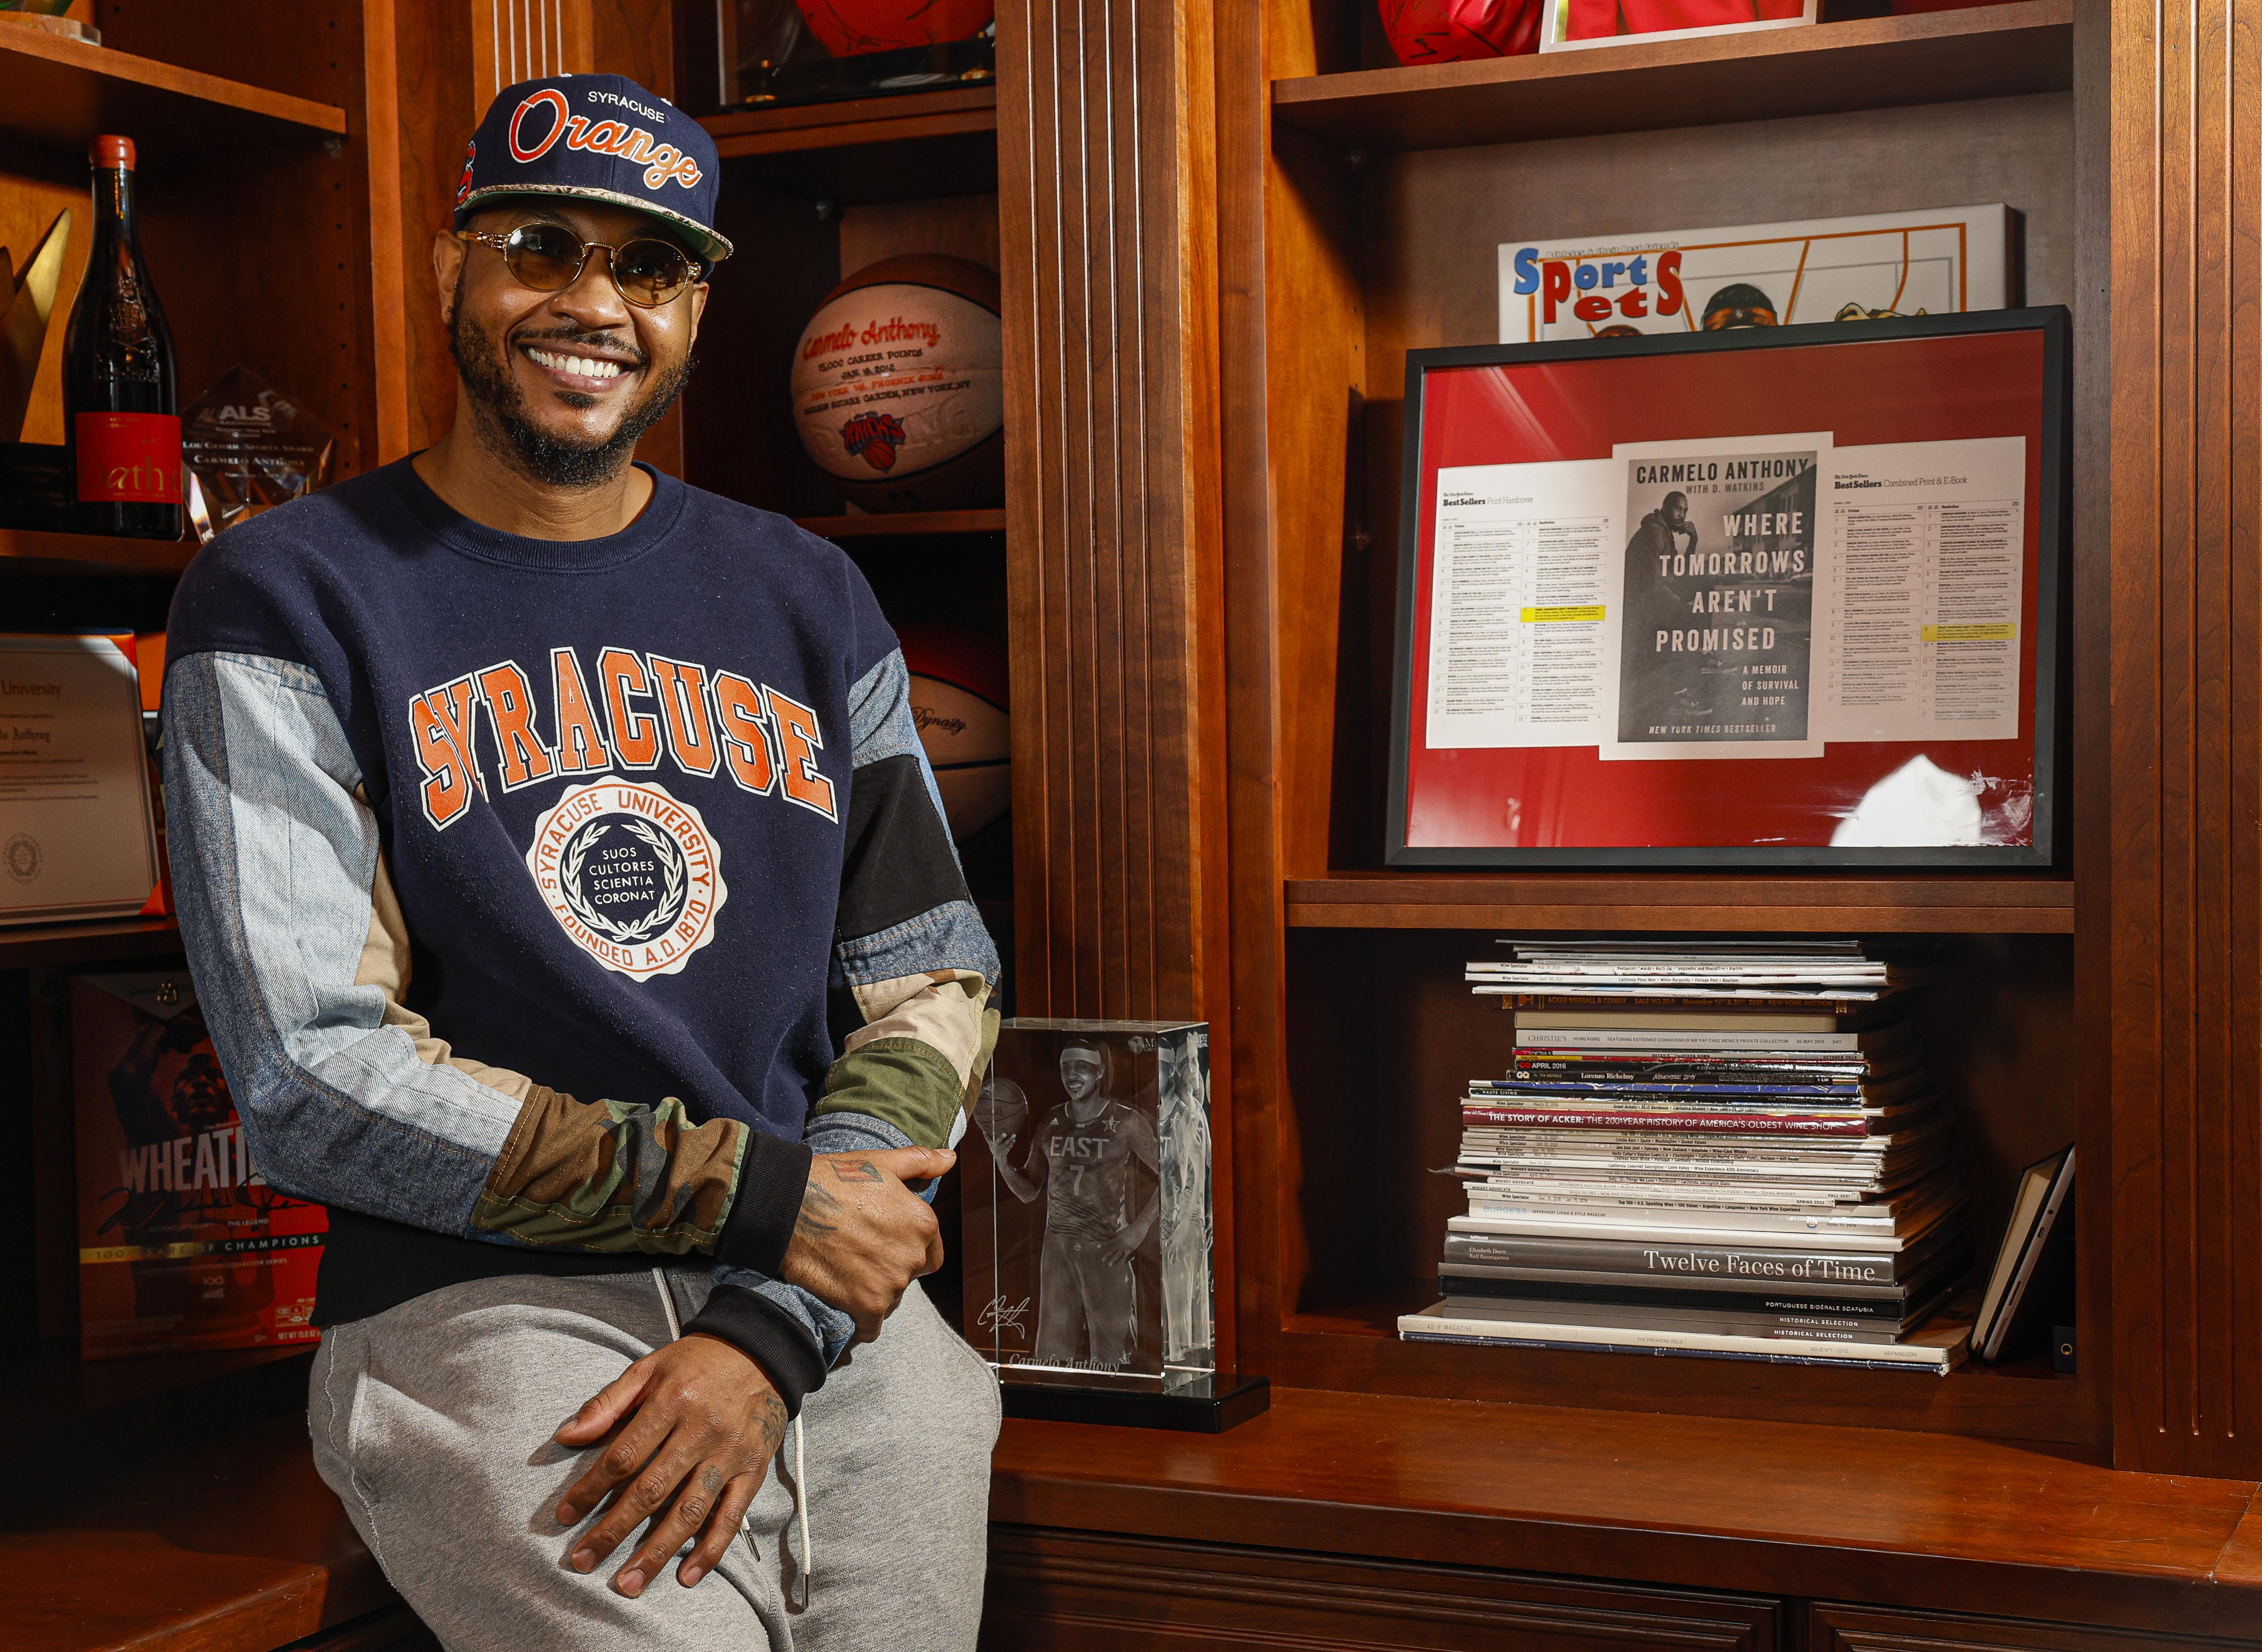 NBA Rumors: Carmelo Anthony Is Unlikely To Return To The Los